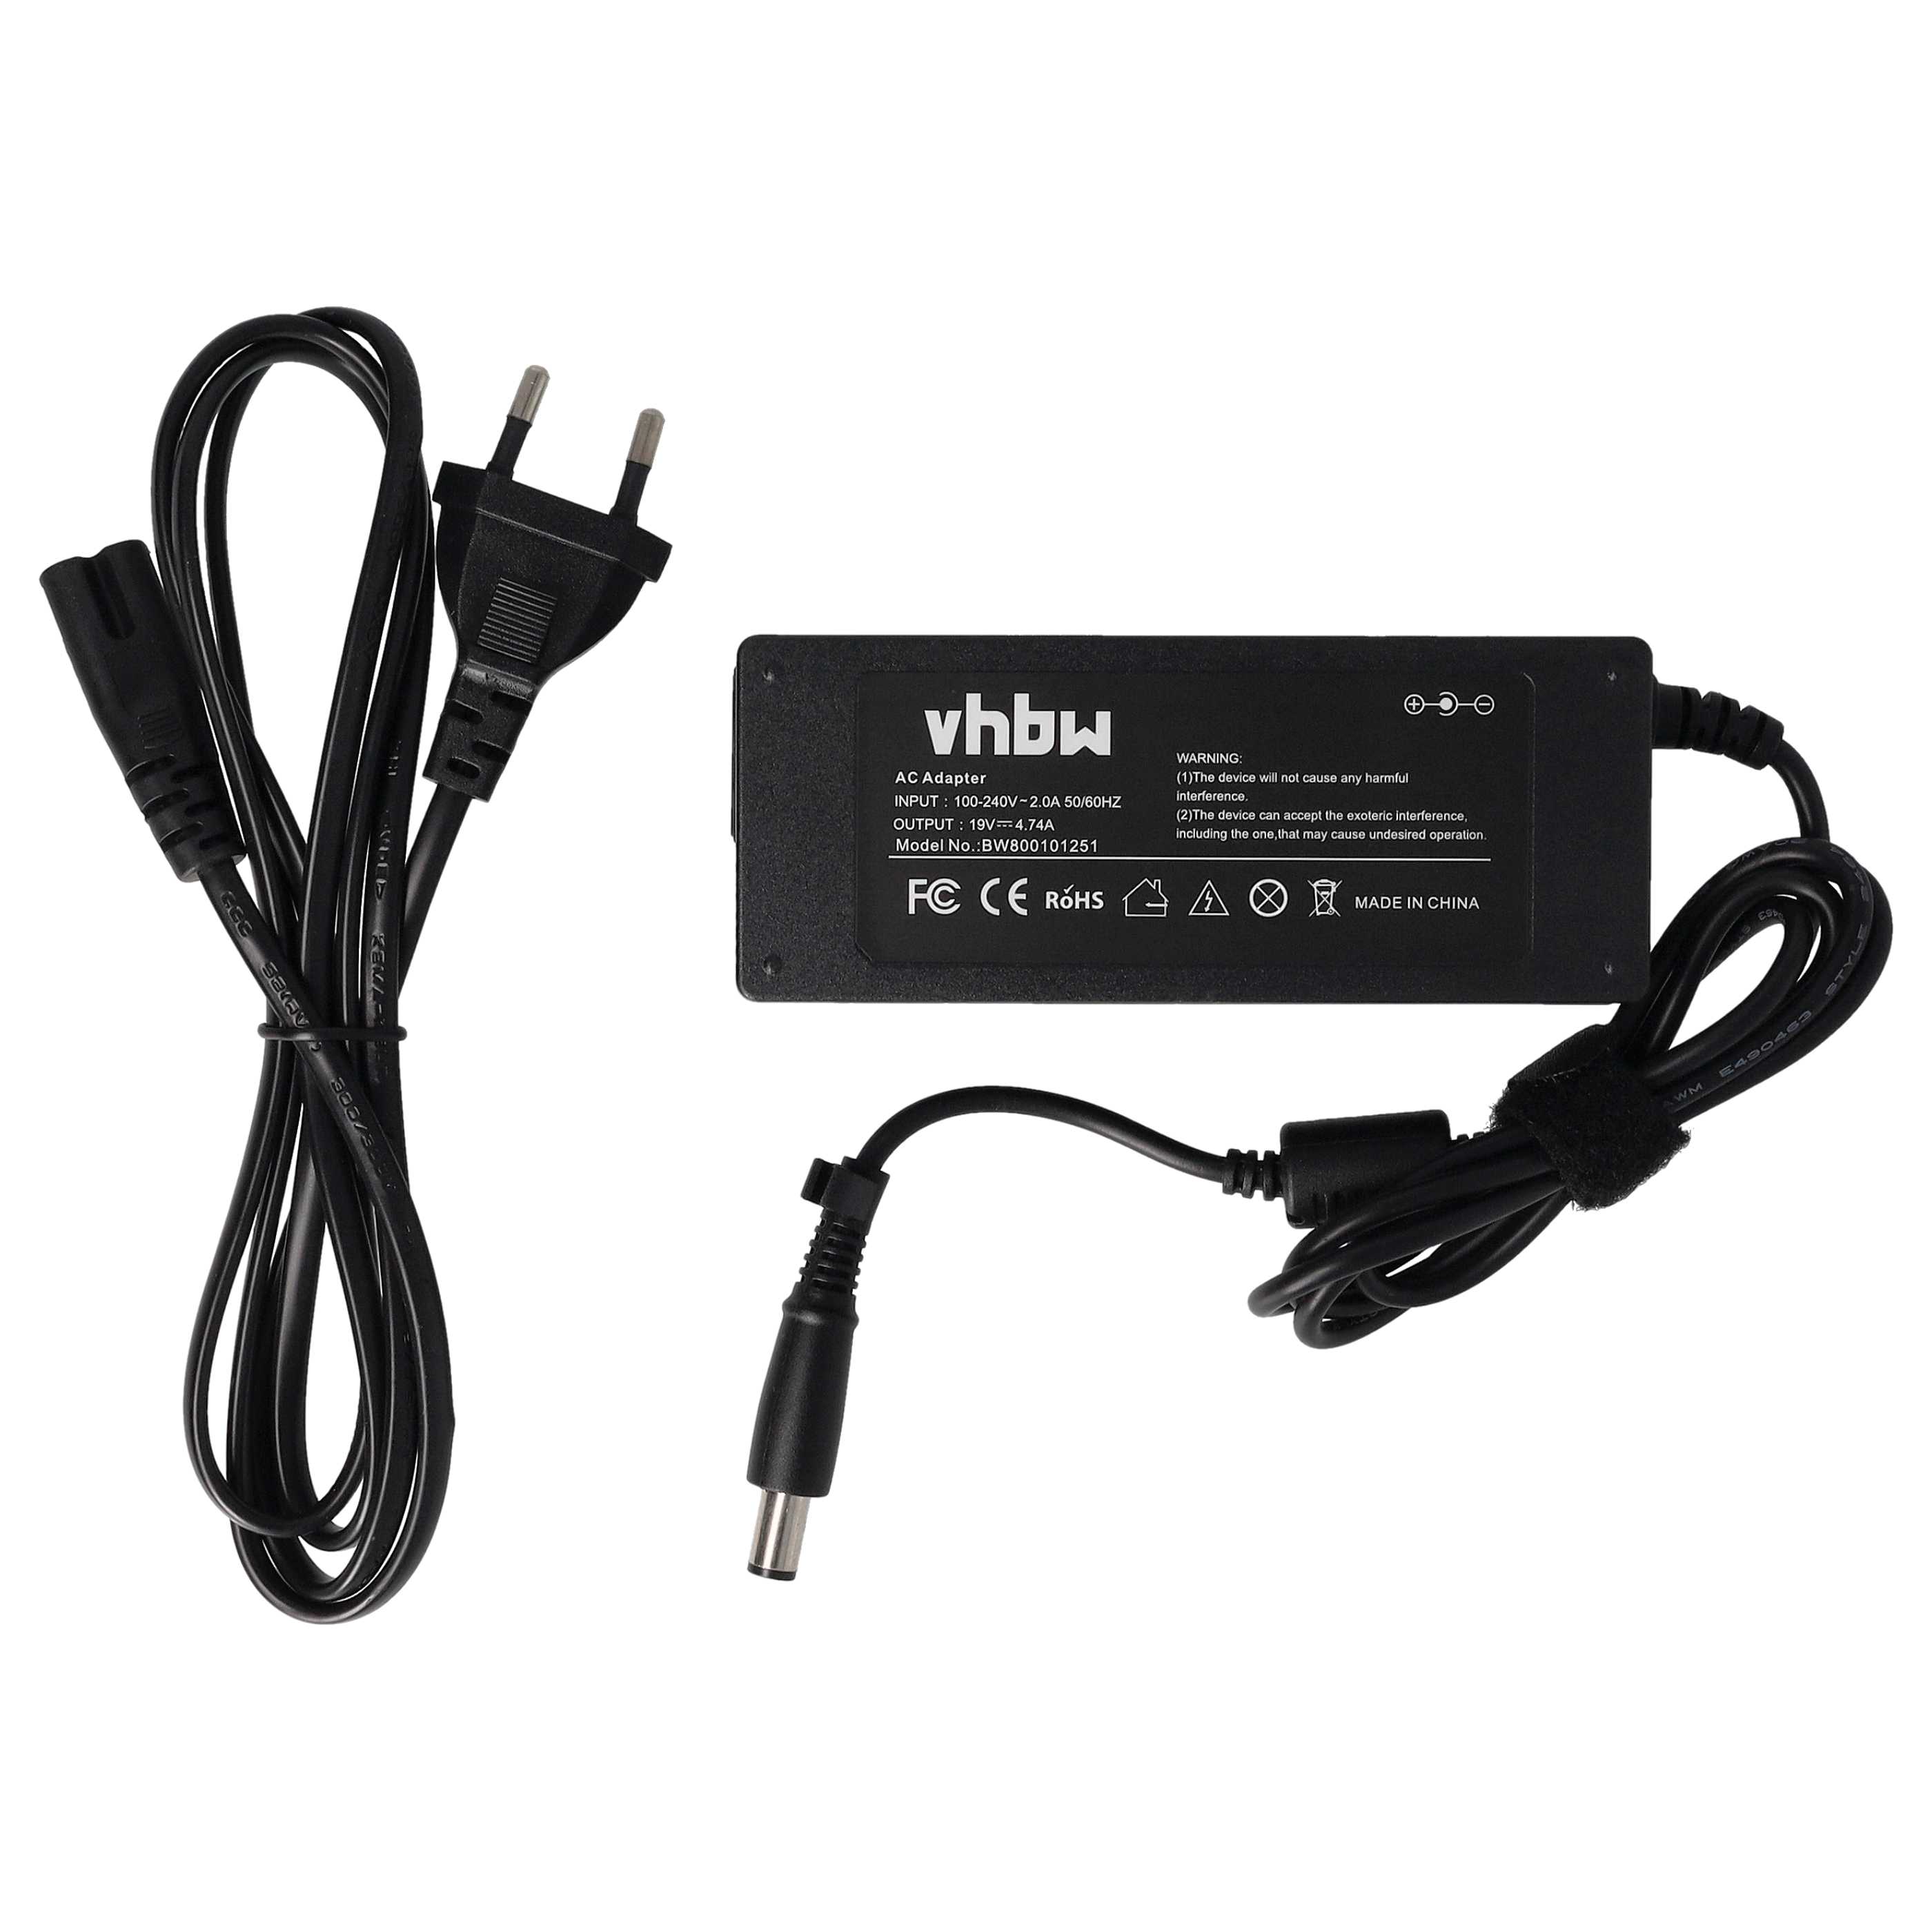 Mains Power Adapter replaces HP / Compaq 384019-002, 374473-001, 384019-001 for HPNotebook etc., 90 W